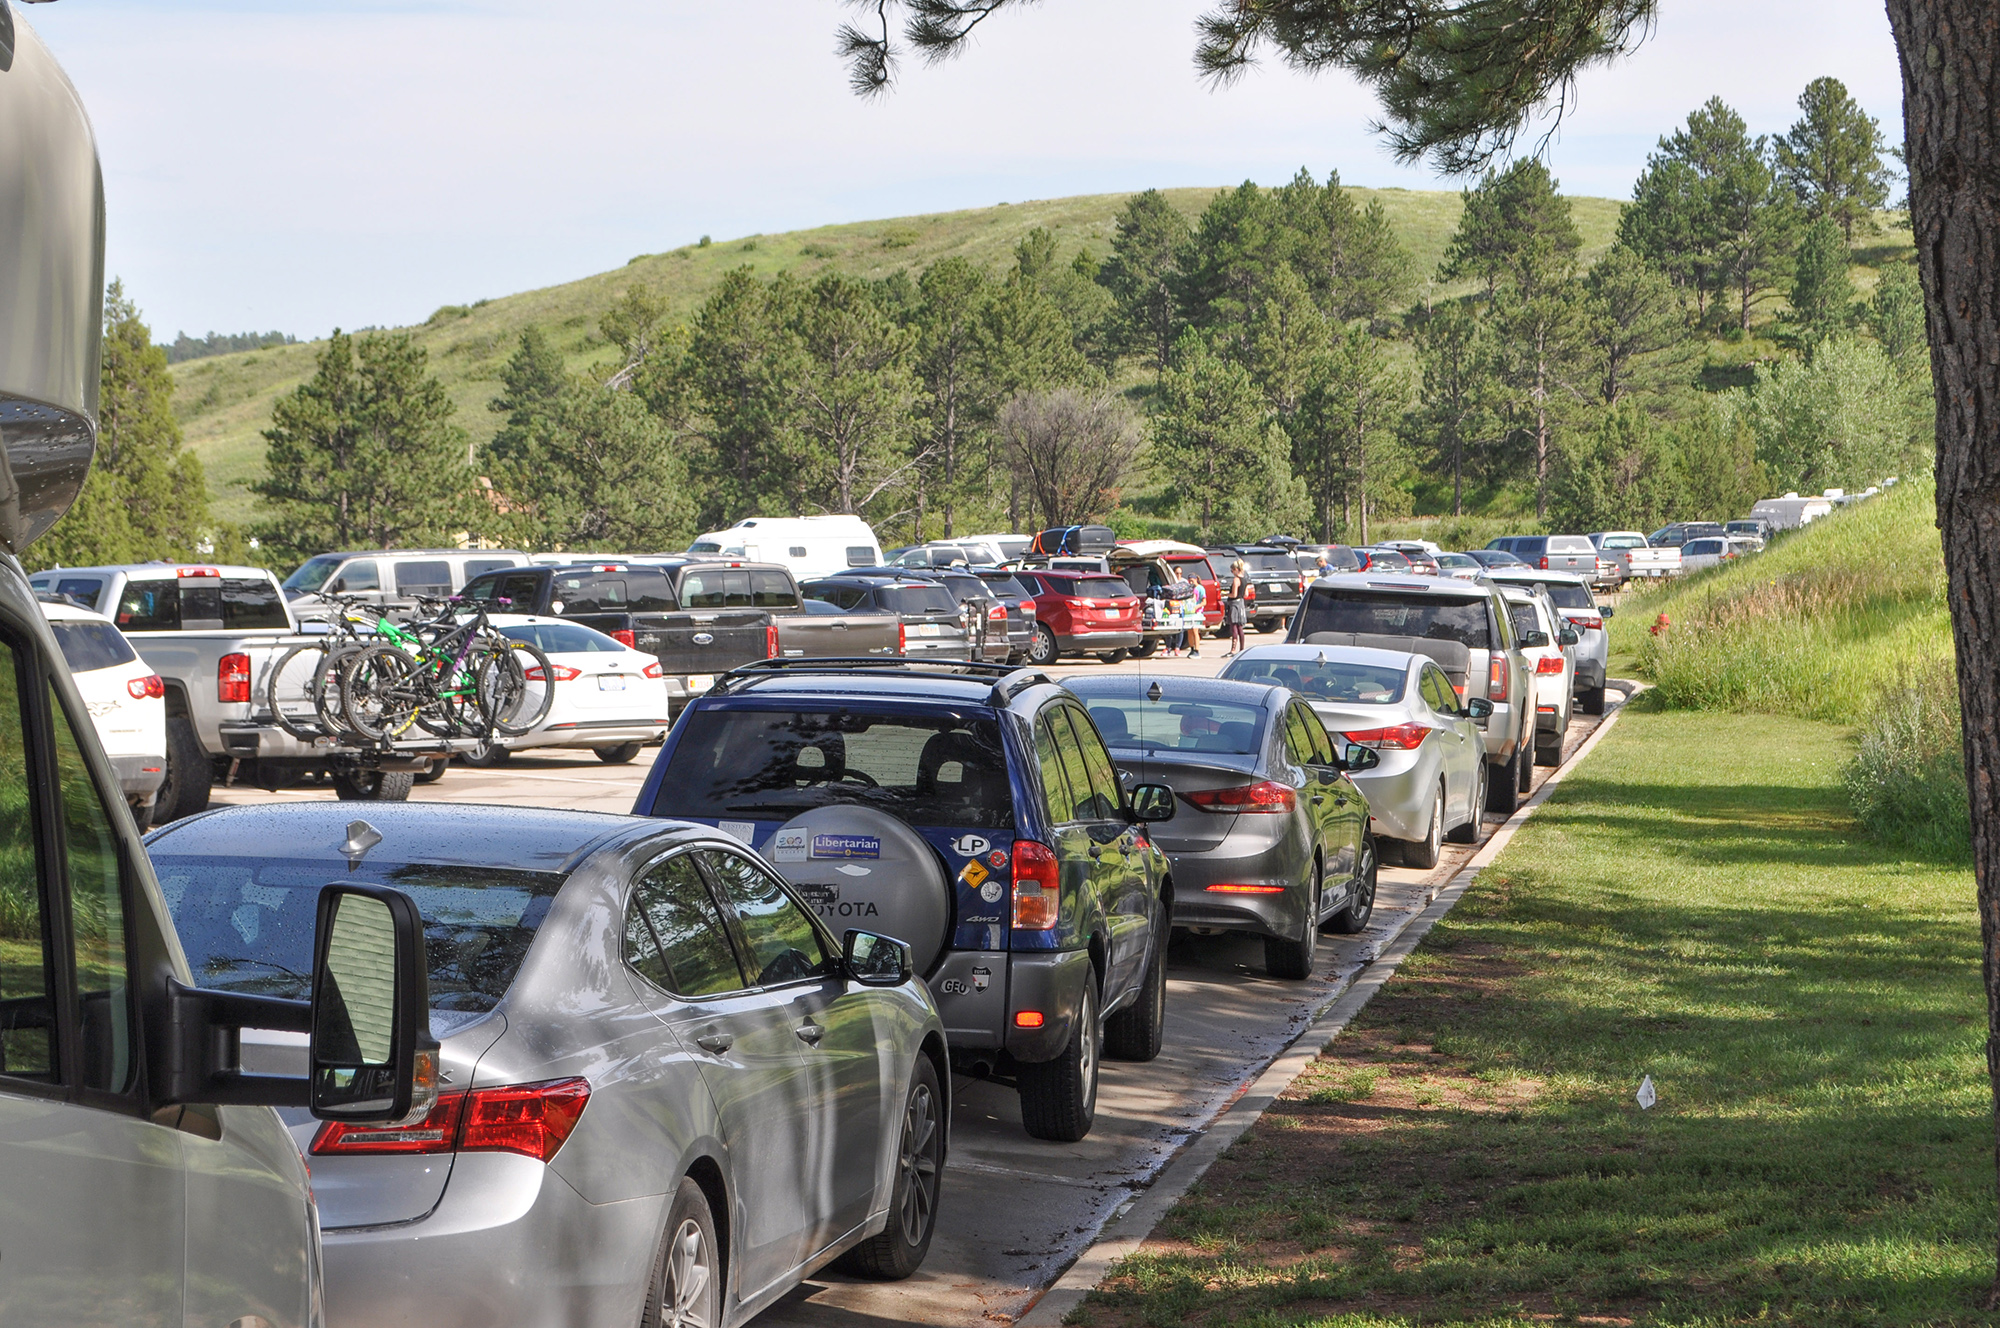 Crowded parking lot with two rows of cars facing away from the camera, a grass lawn to the right and a hill with green grass and ponderosa pine trees in the background.